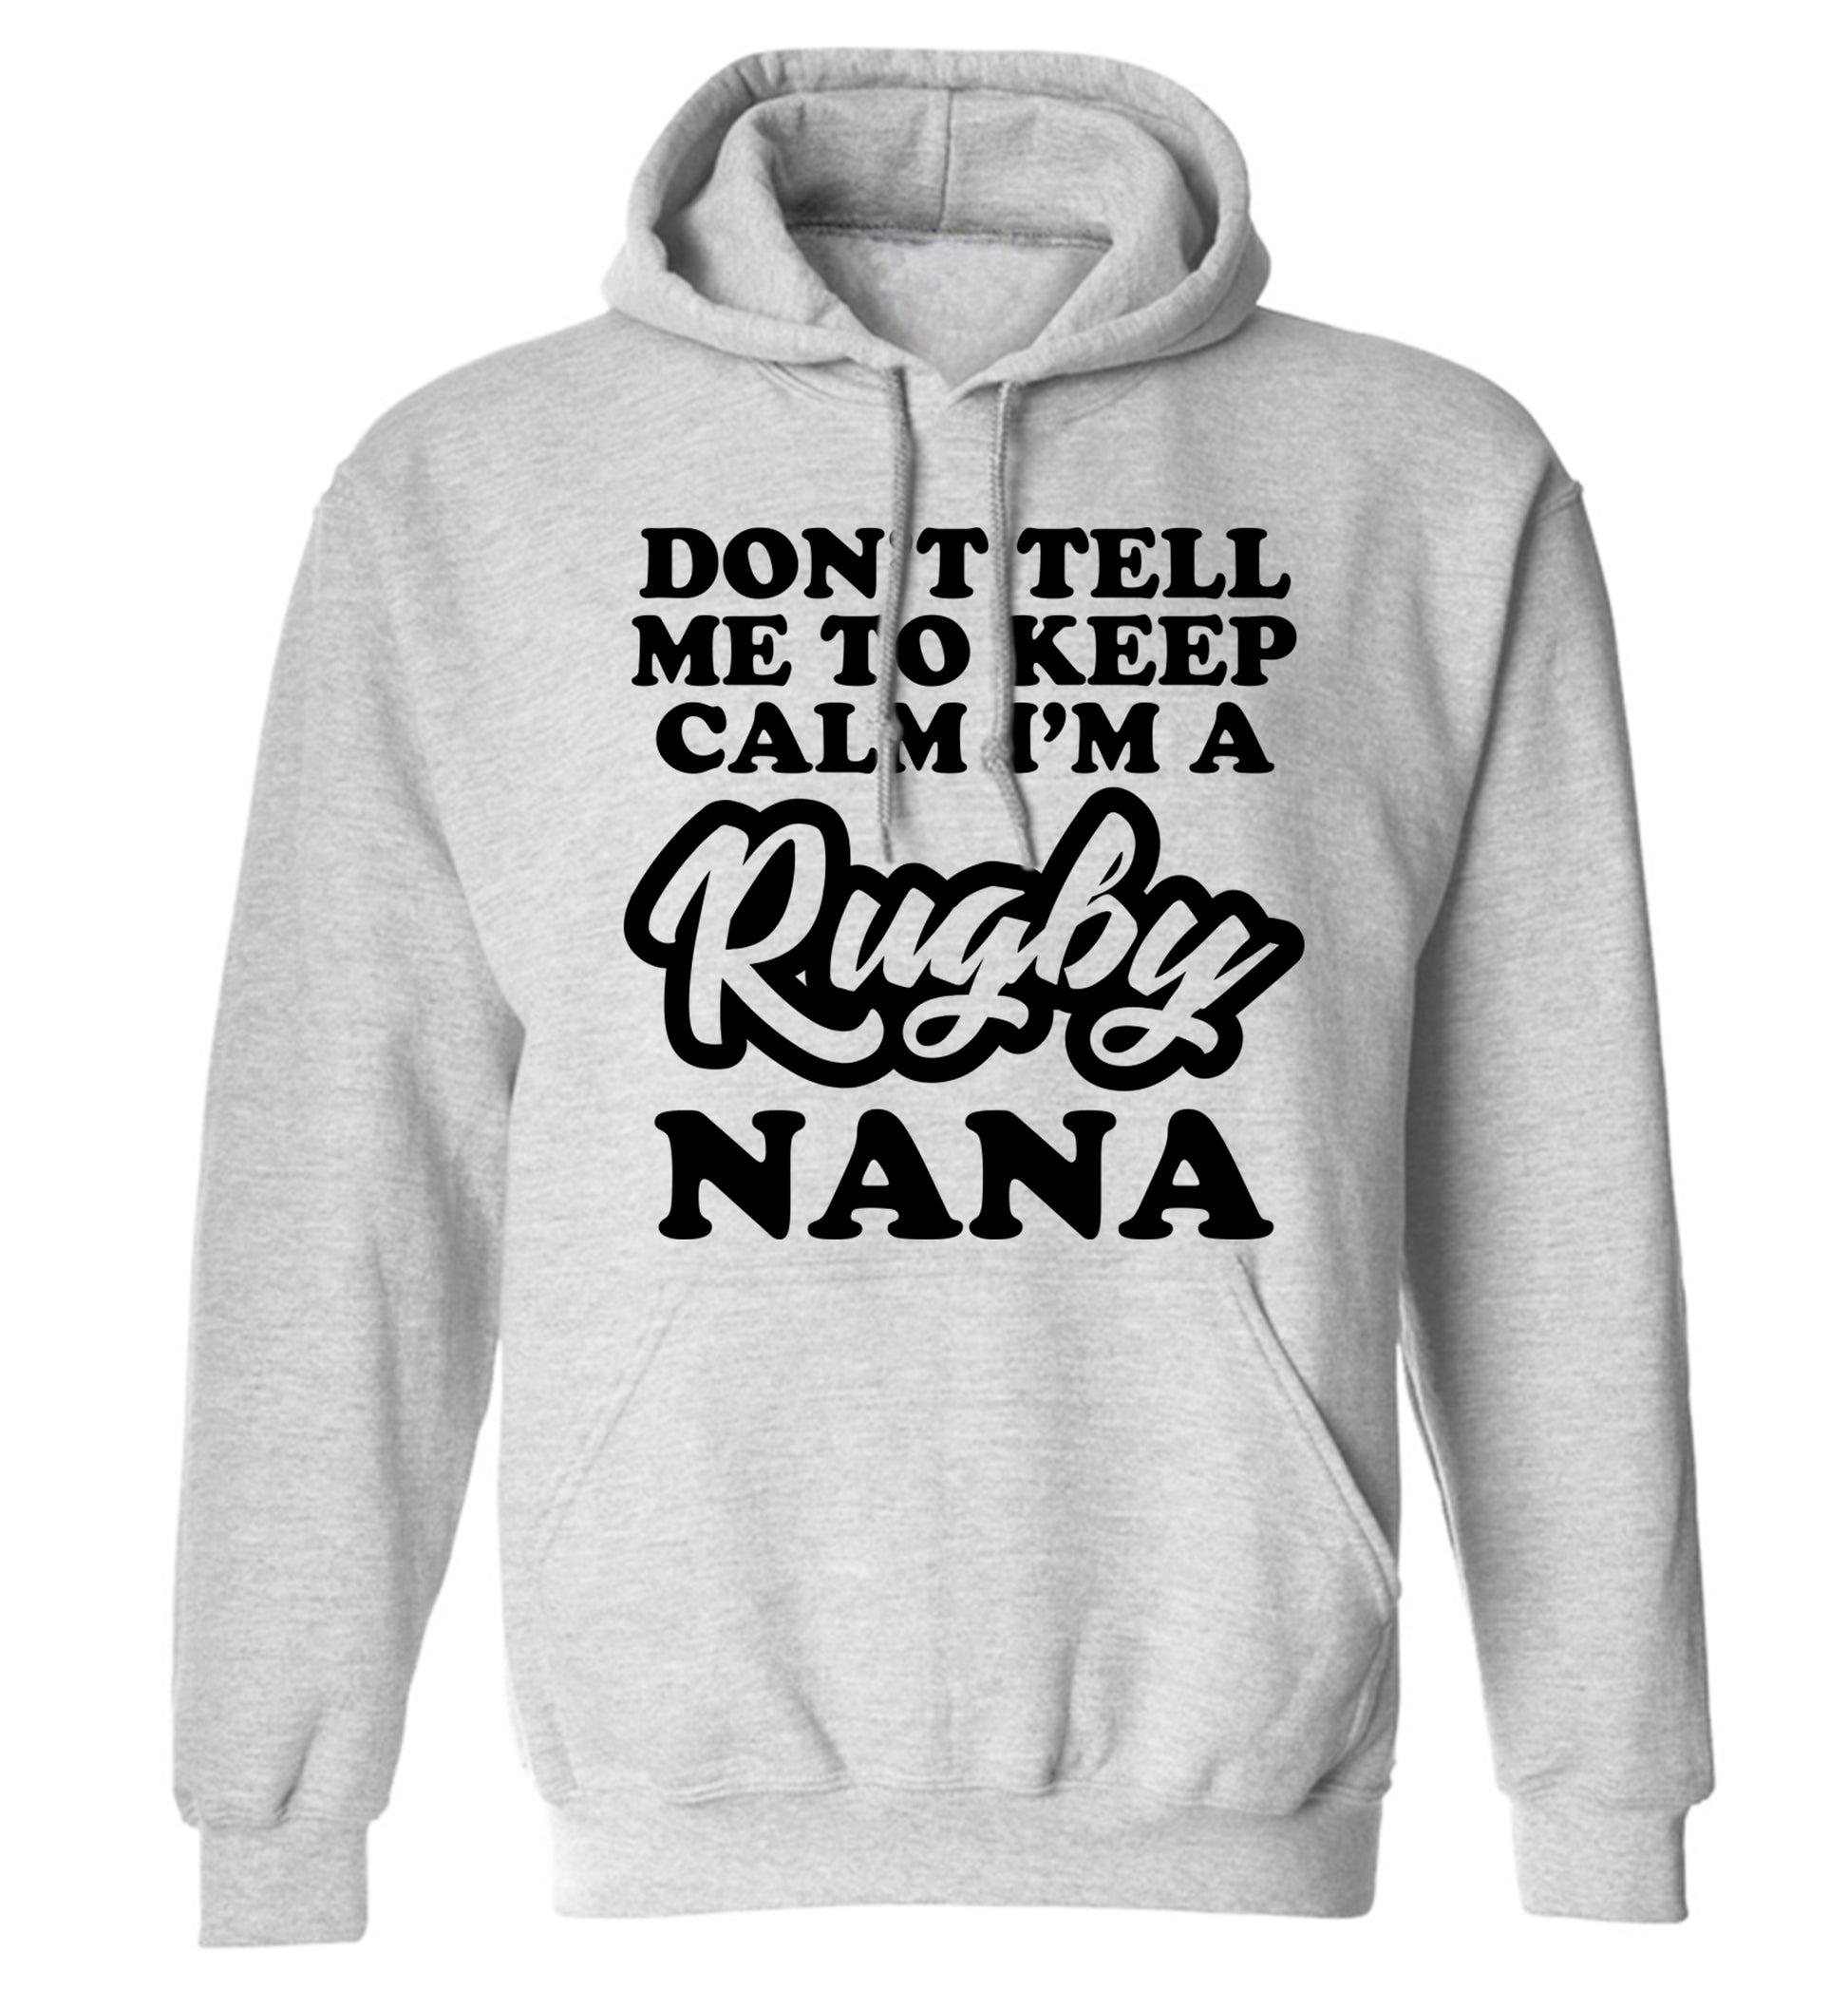 Don't tell me to keep calm I'm a rugby nana adults unisex grey hoodie 2XL